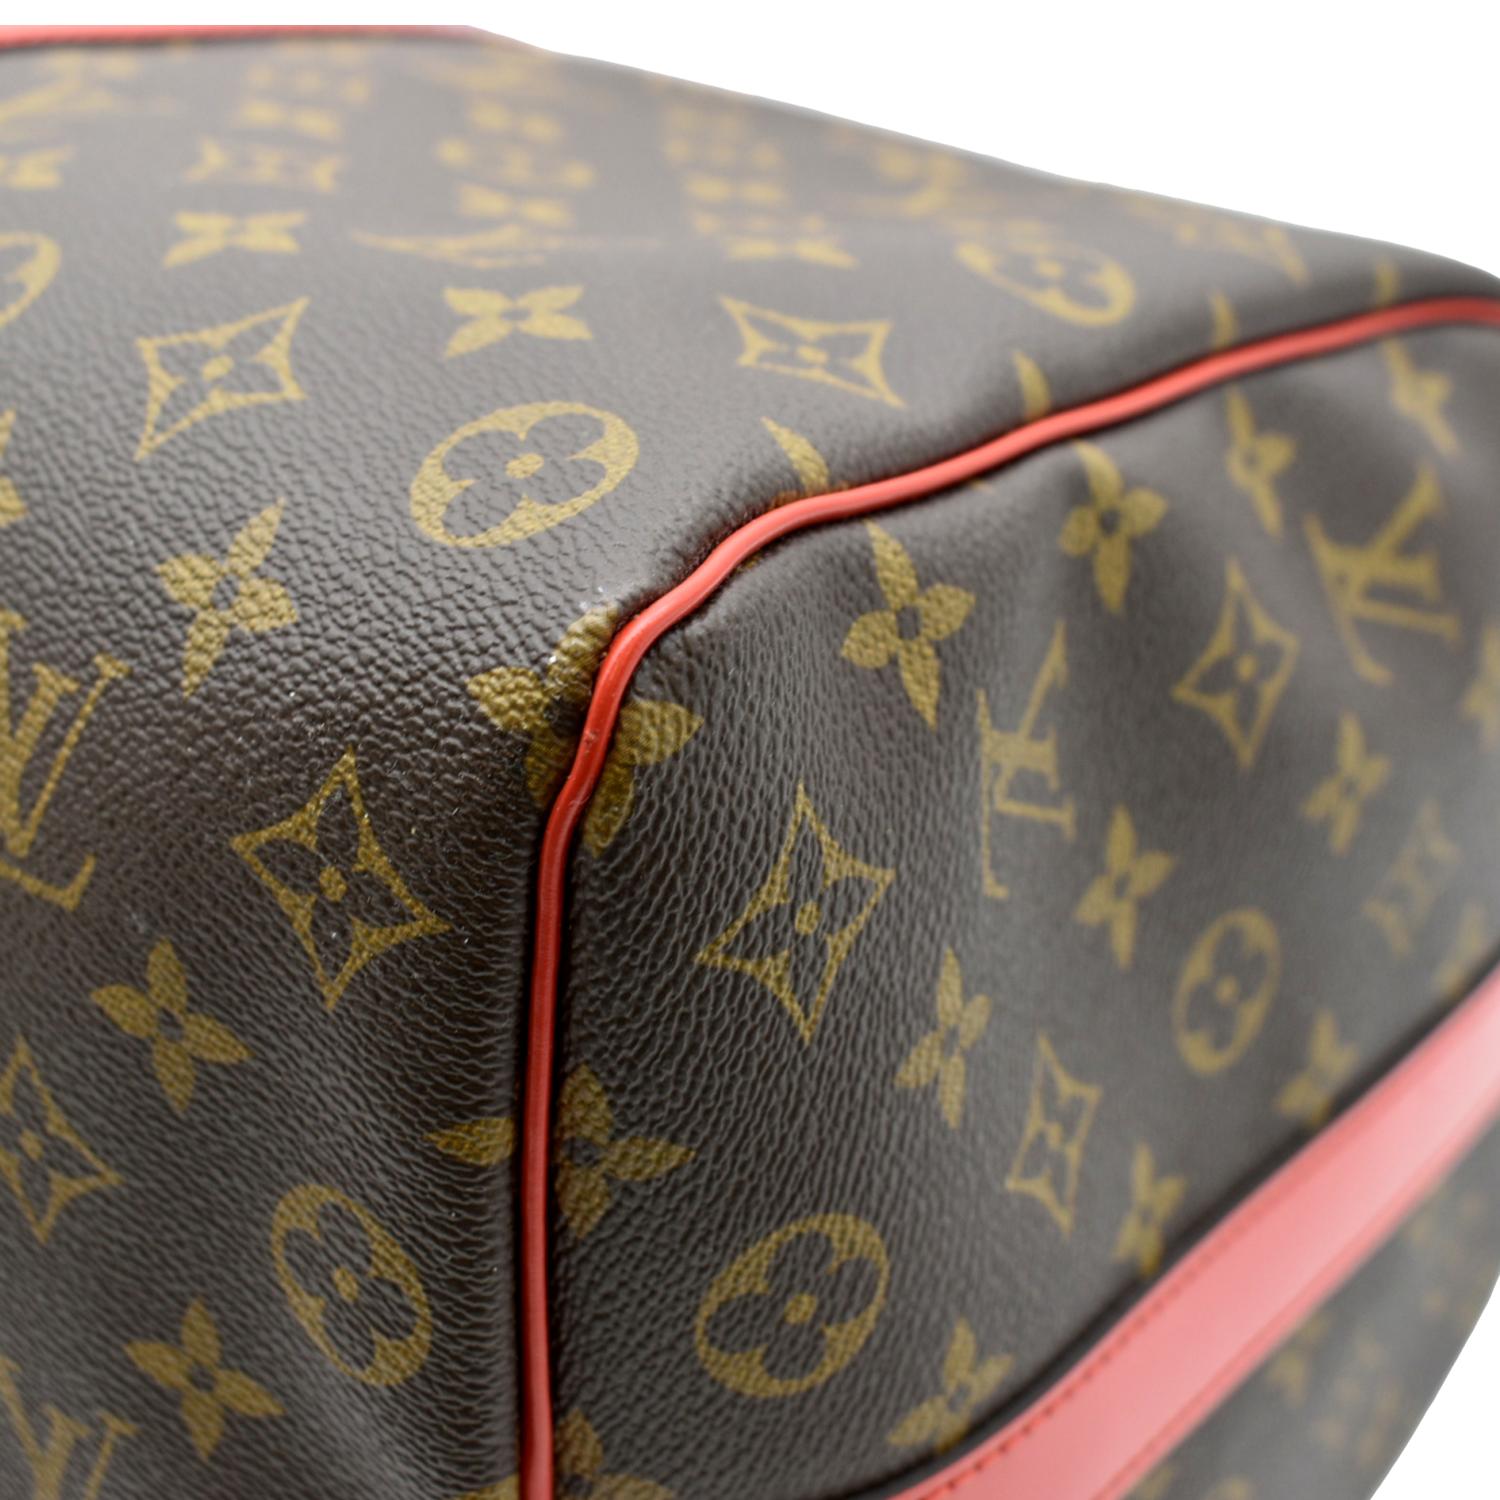 Louis Vuitton Keepall Tote Bags